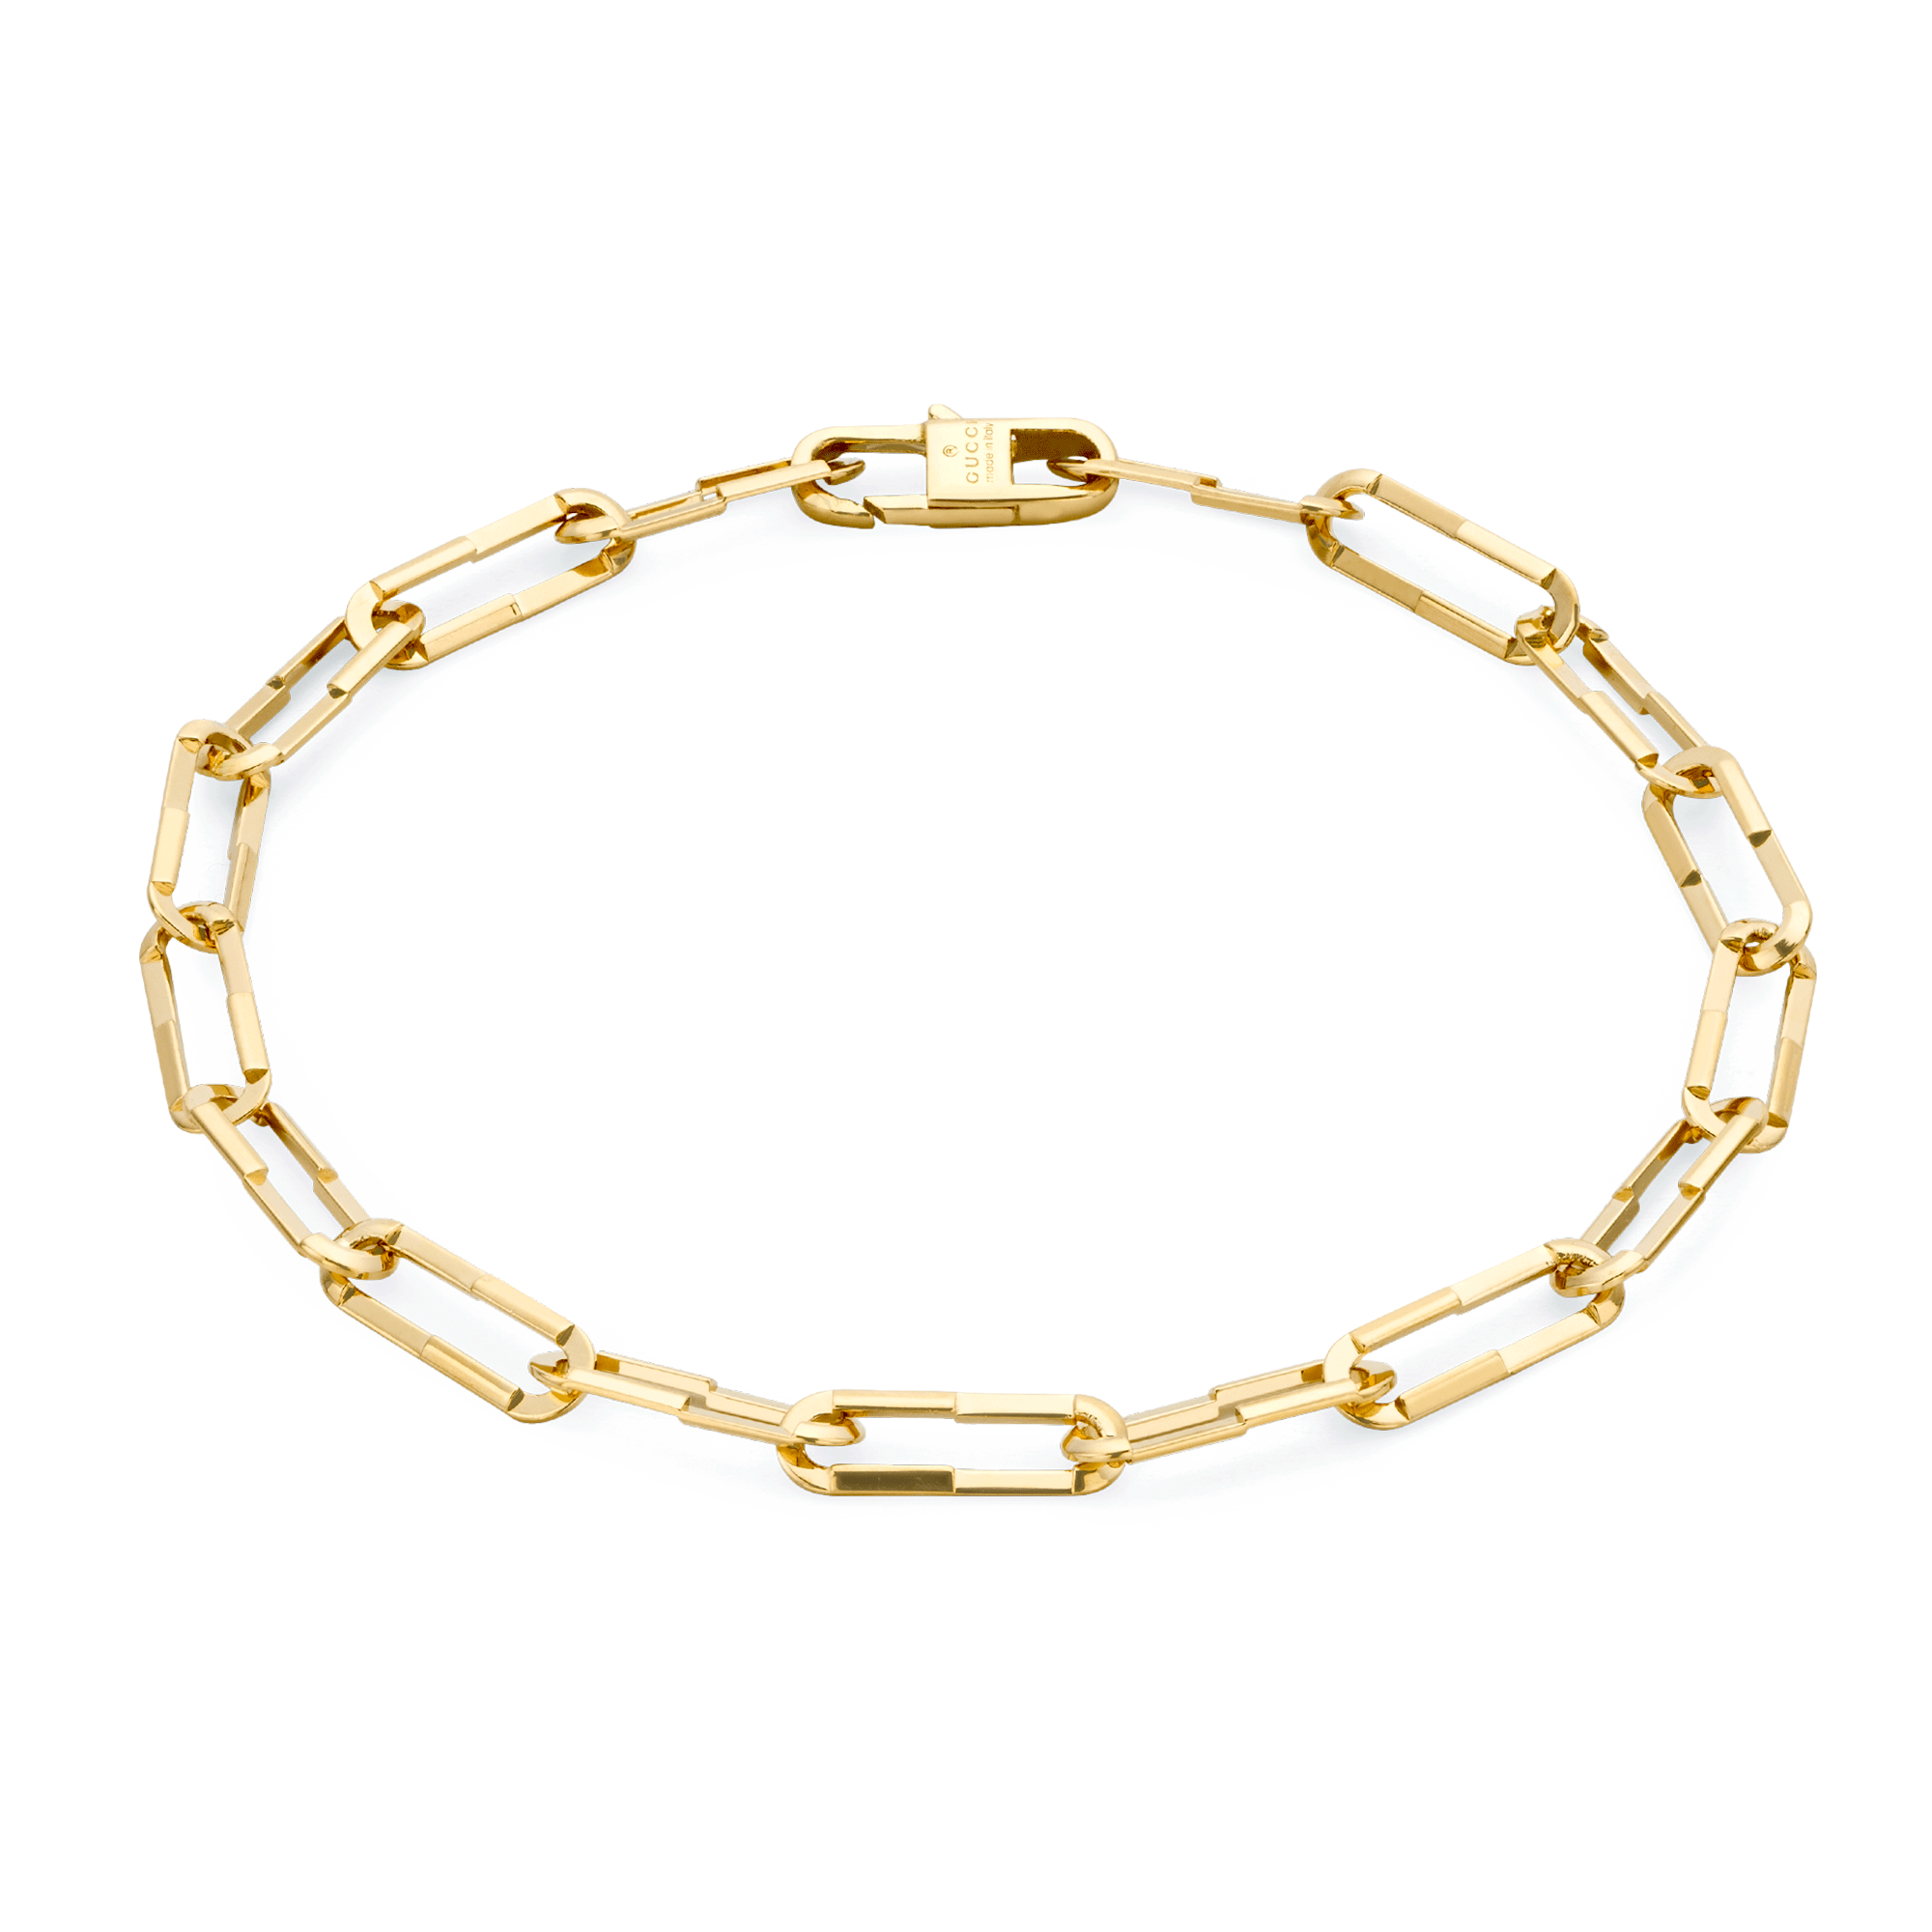 Link to Love 18ct Yellow Gold Paperchain Bracelet